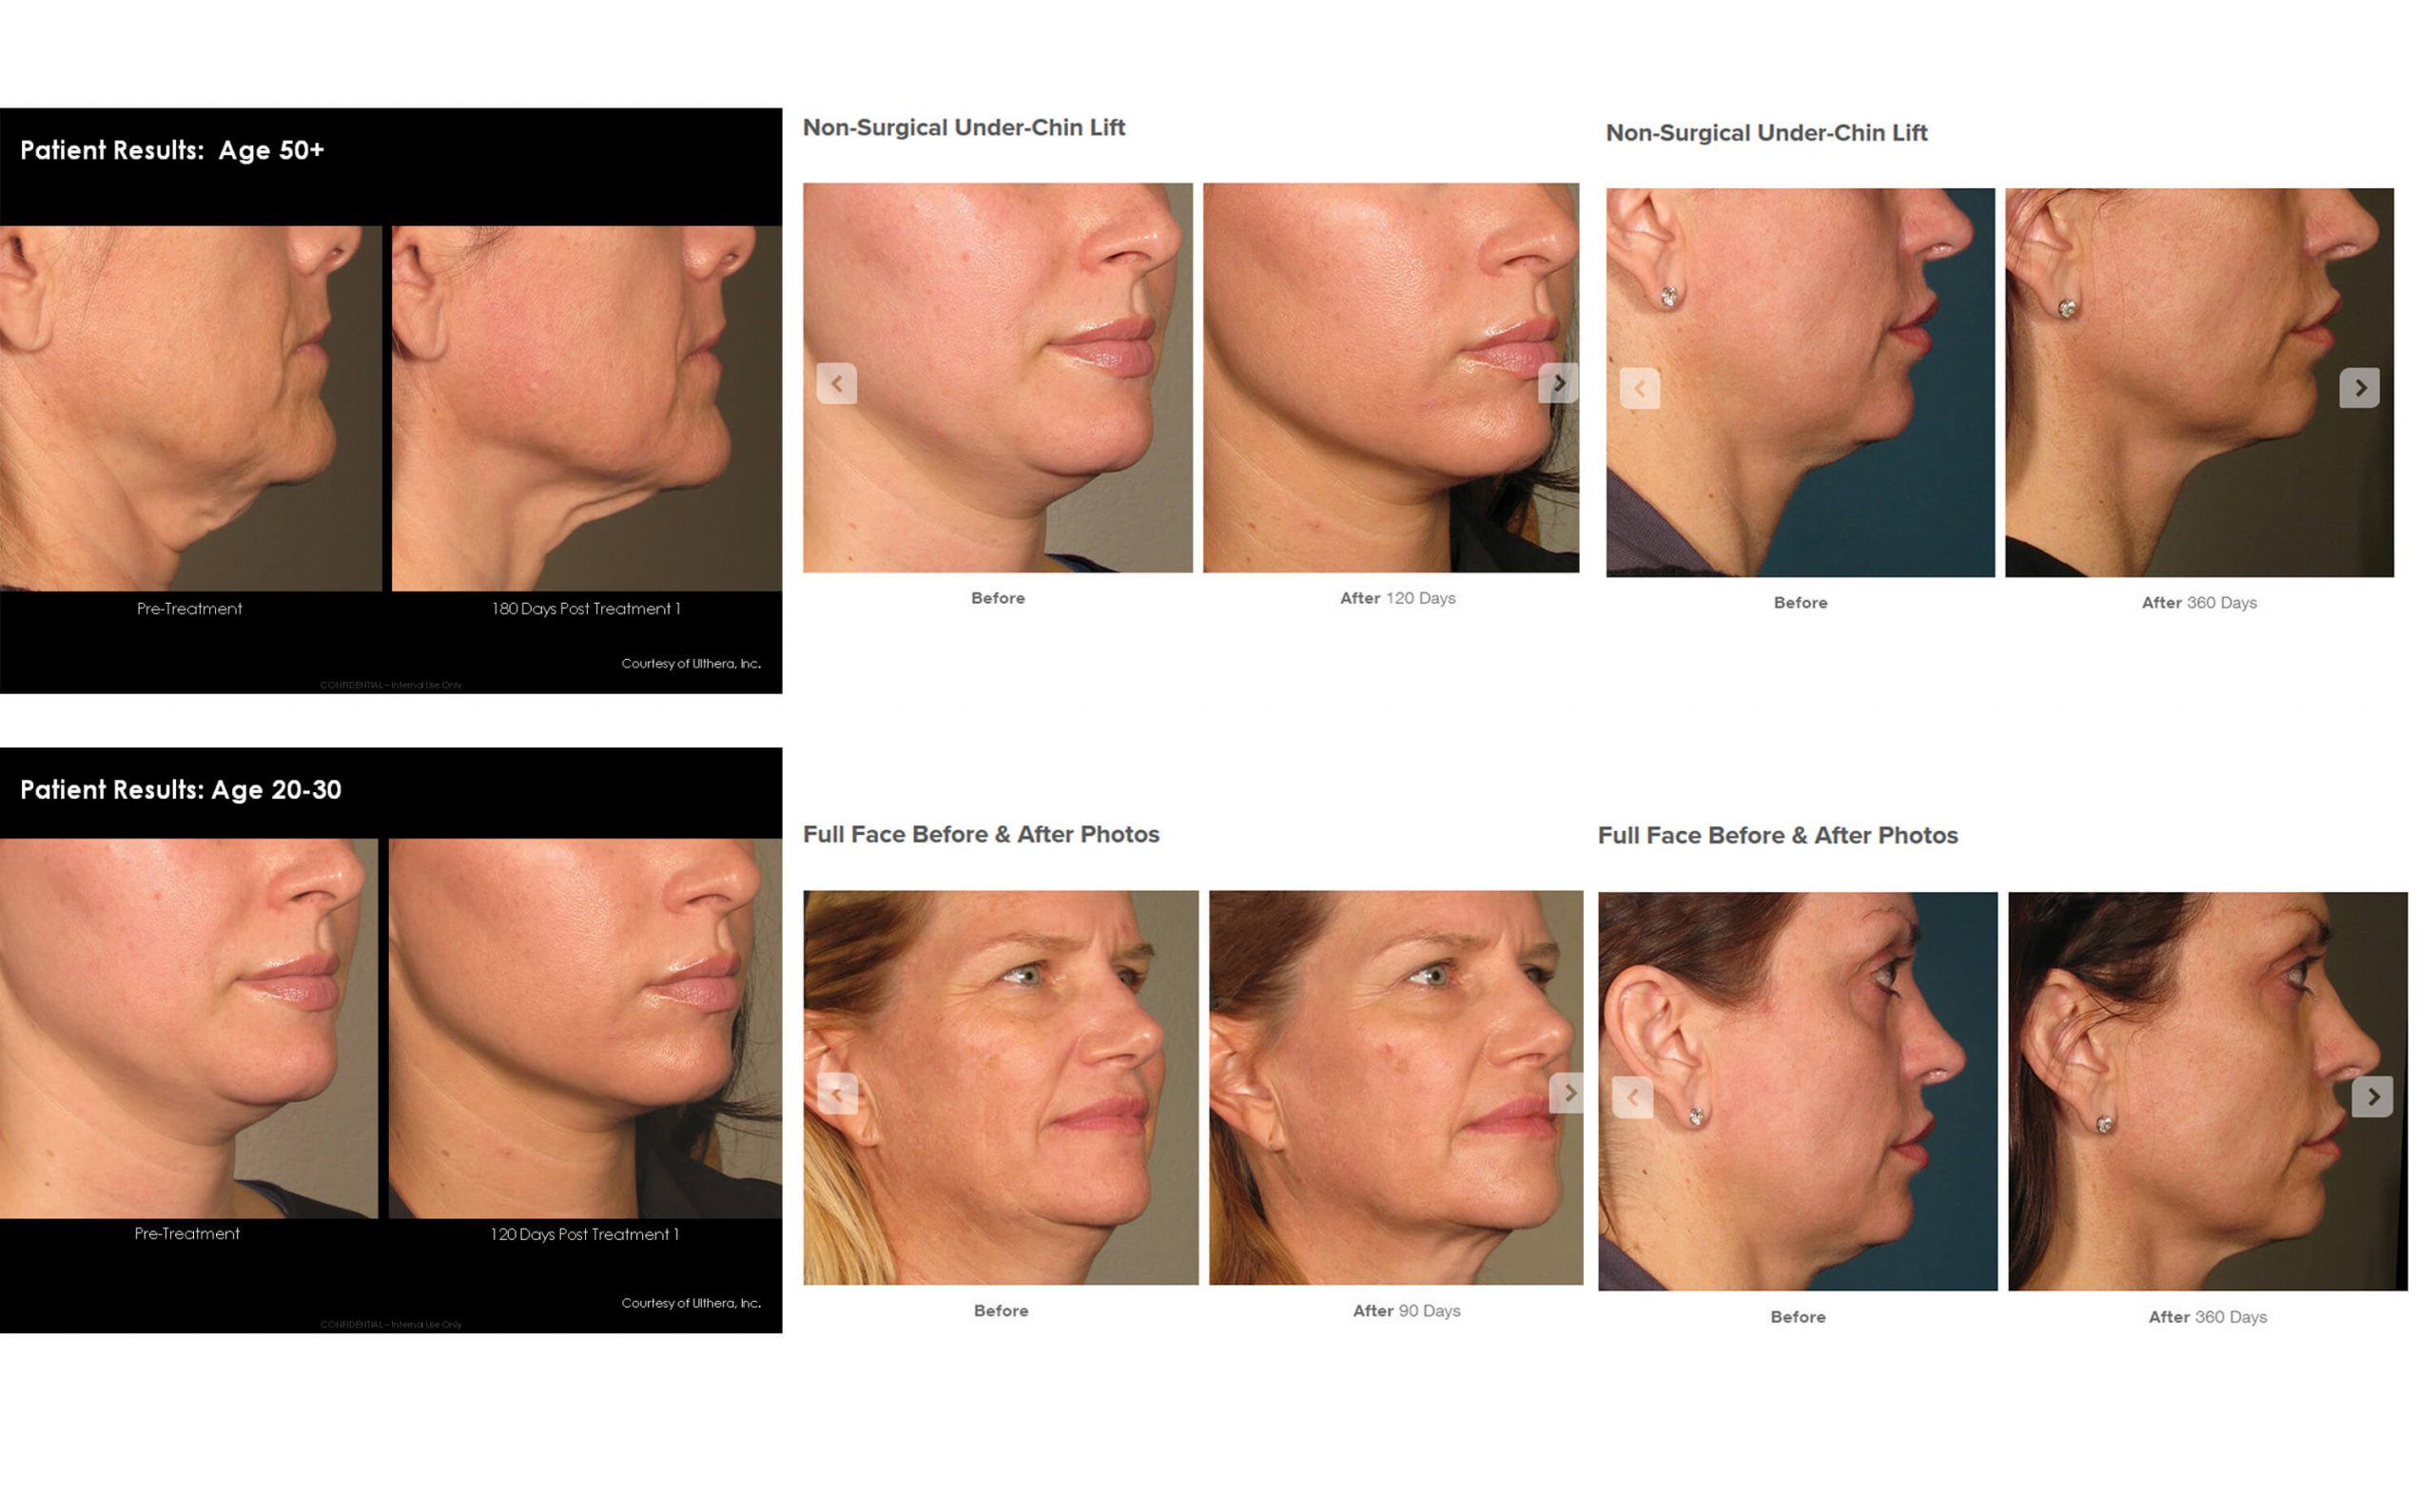 A comparison of before and after of patients that undergo Ultherapy treatment. 